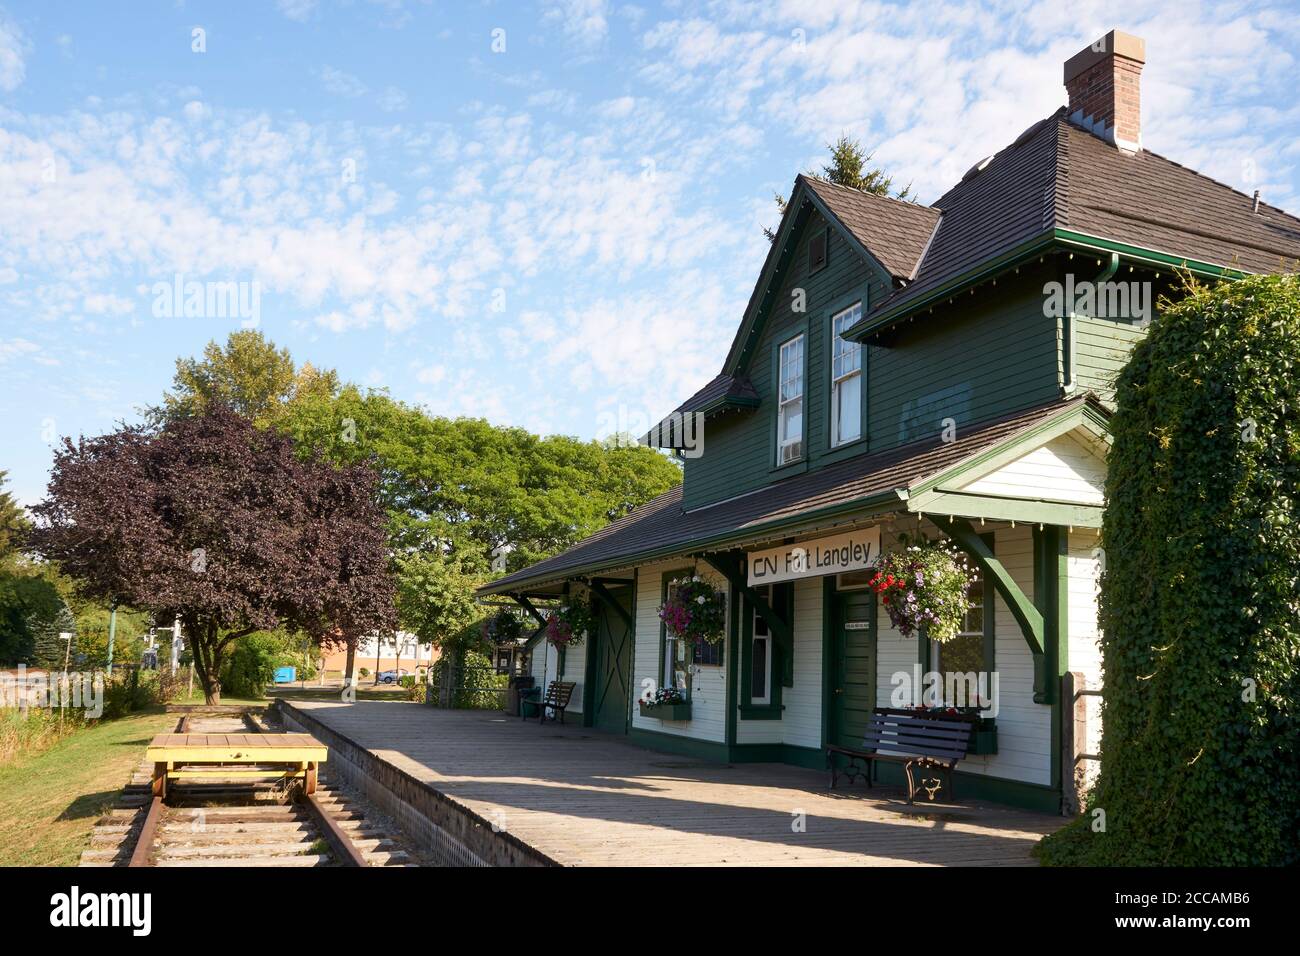 Heritage CNR Canadian National Railway Station in the town of Fort Langley, British Columbia, Canada Stock Photo